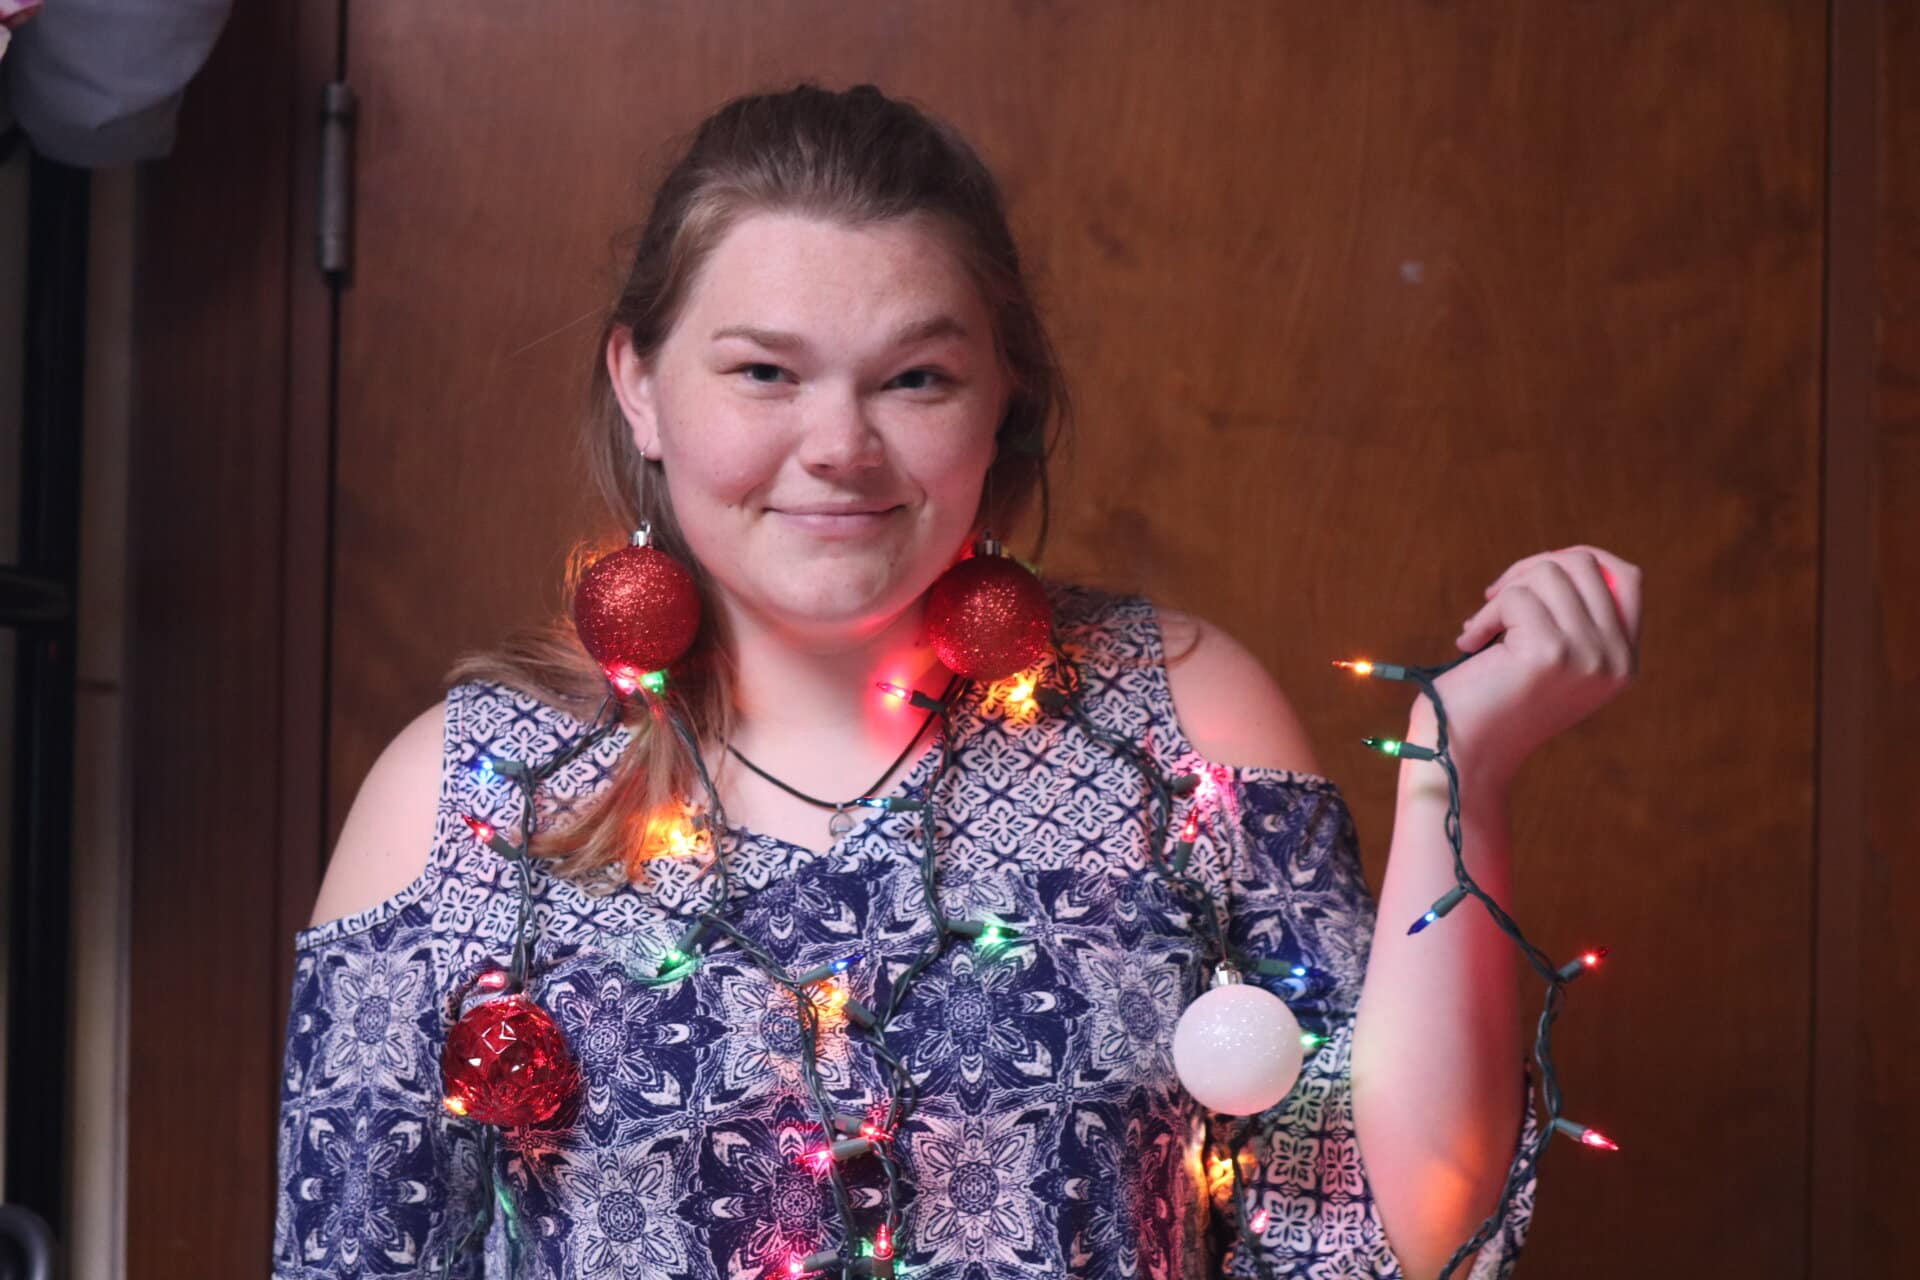 Sophomore music education major Caroline Whilden even let her roommate decorate her with Christmas lights and ornaments.